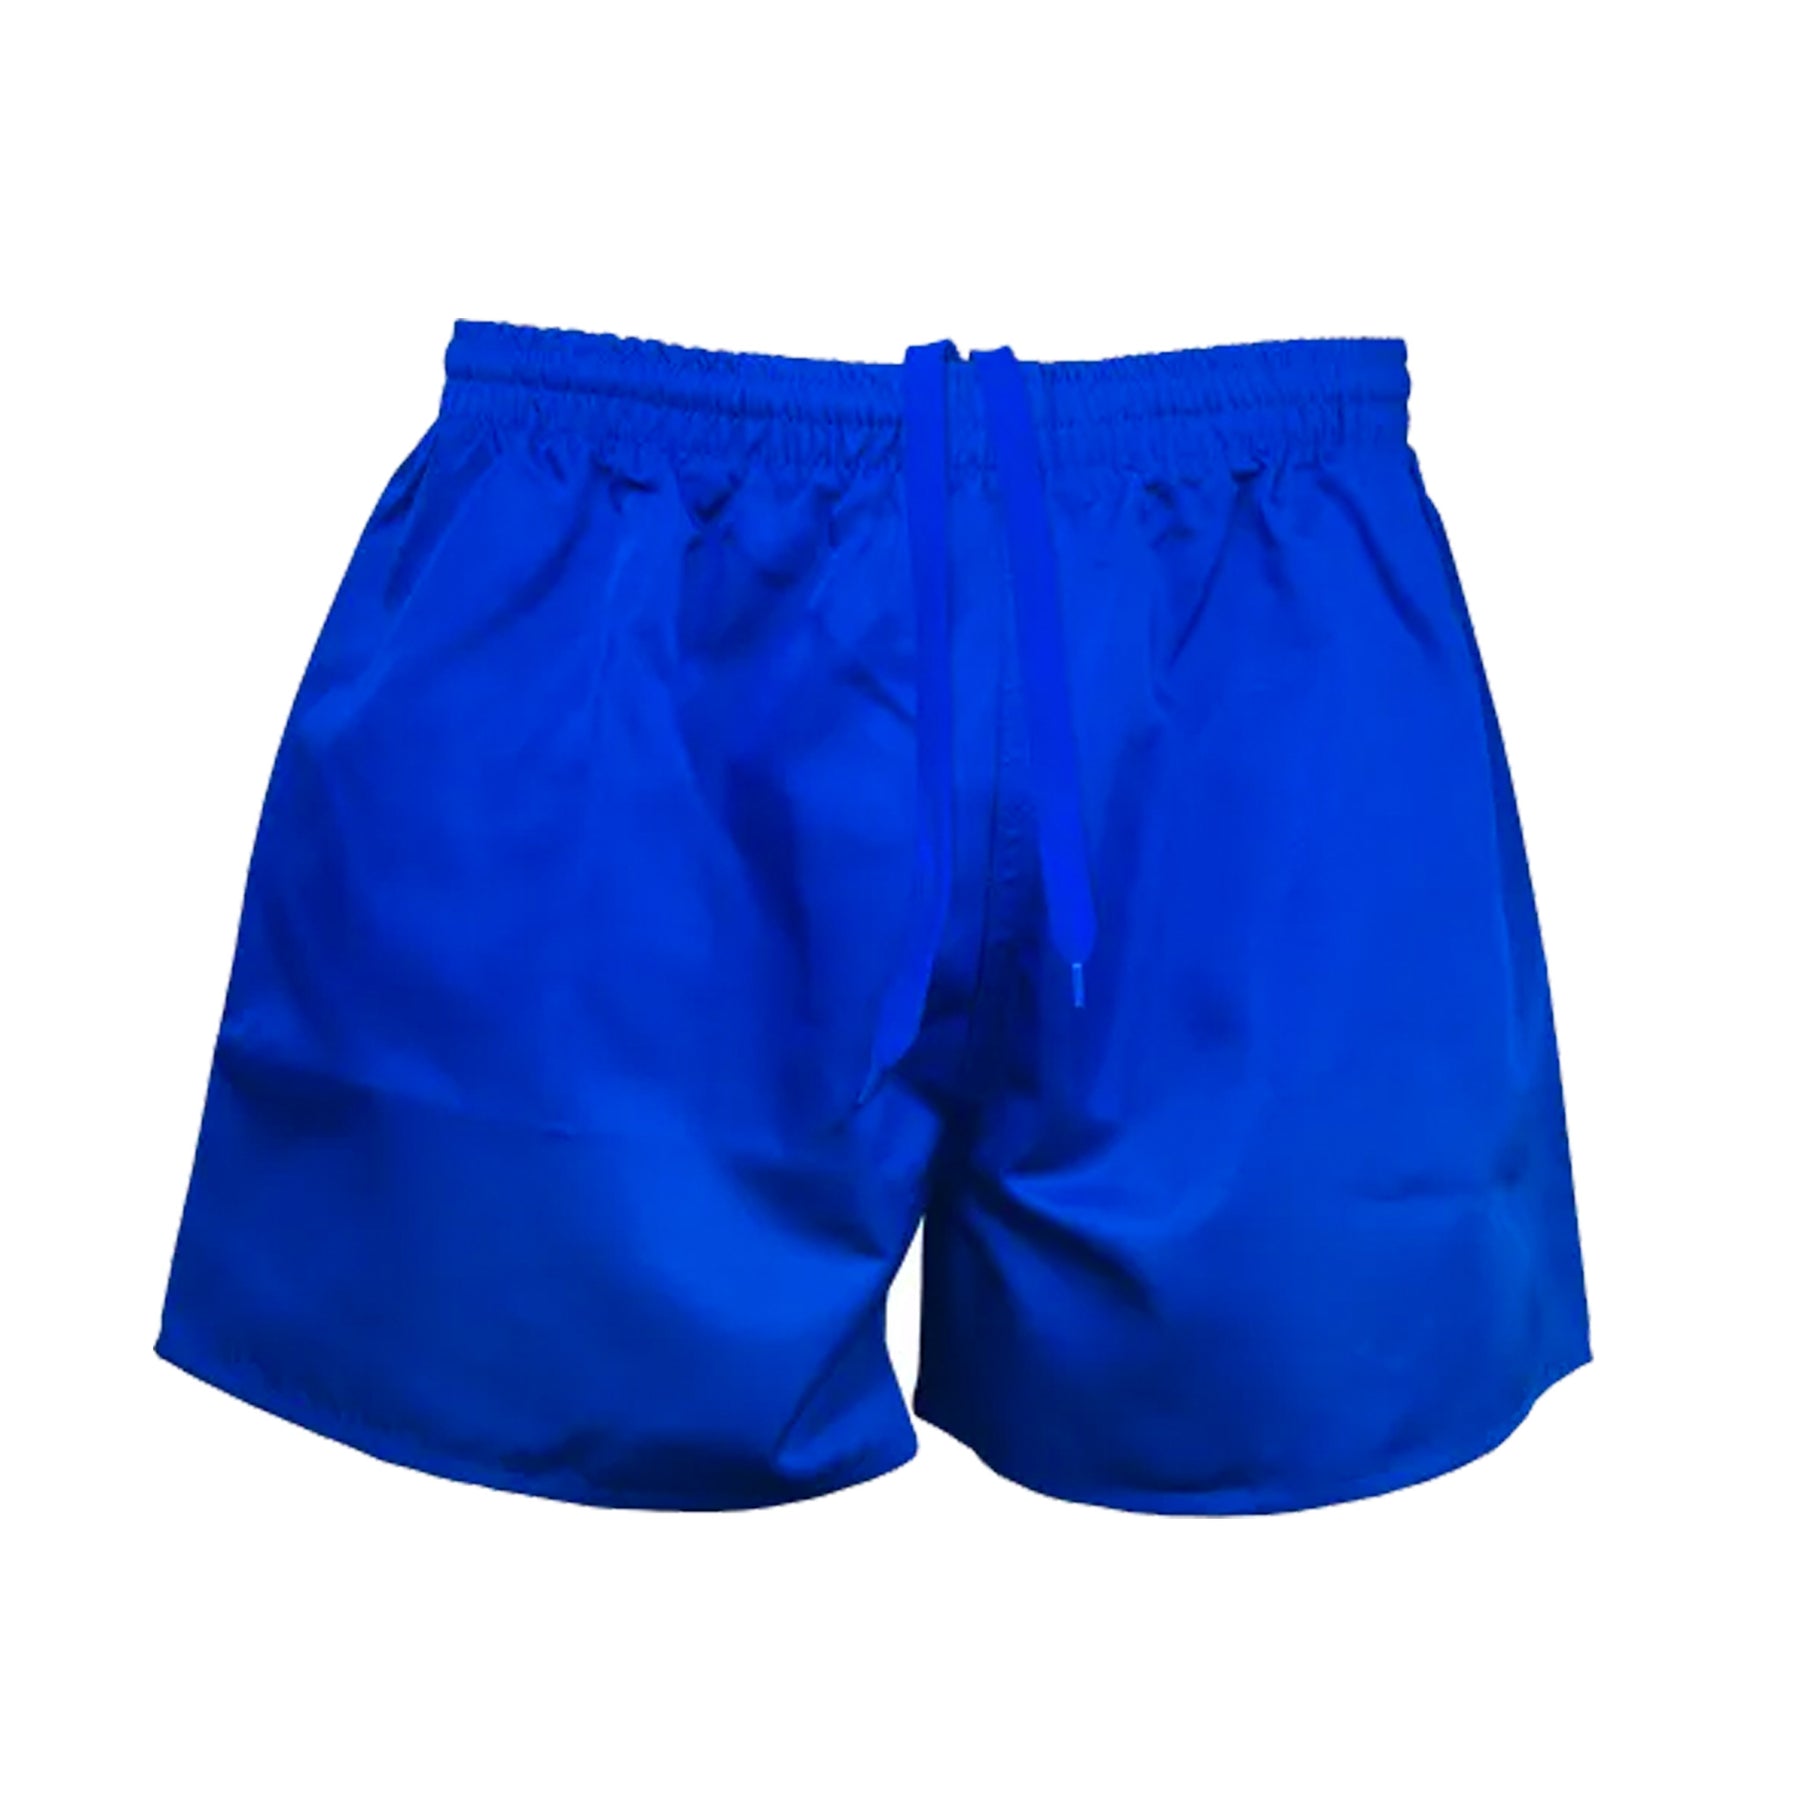 aussie pacific rugby mens shorts in royal